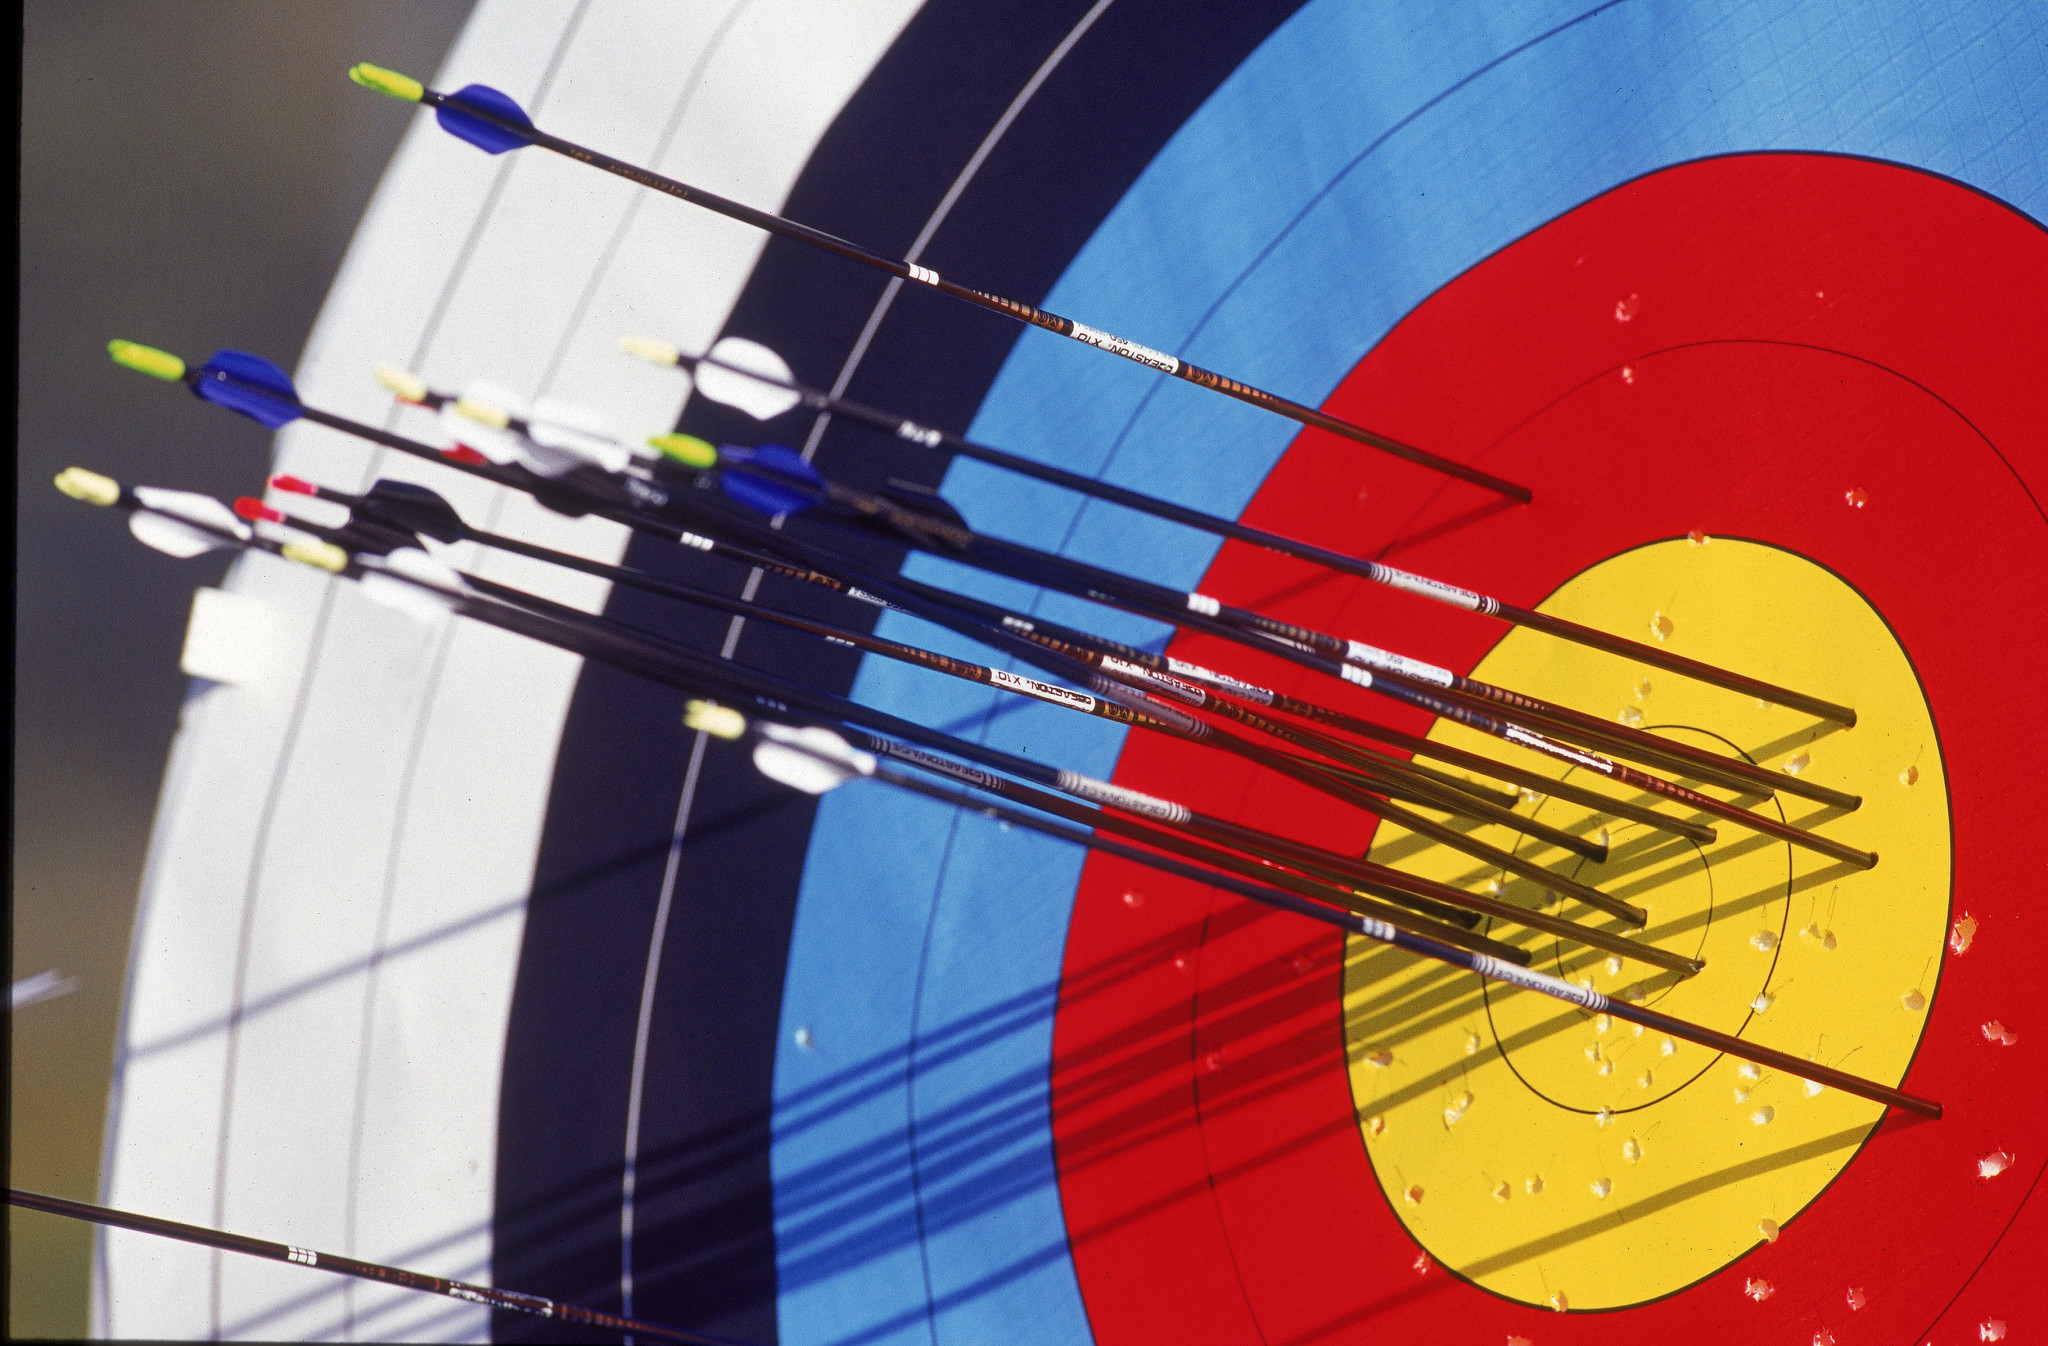 Hangzhou 2022 to be first Asian Games with full slate of 10 archery events